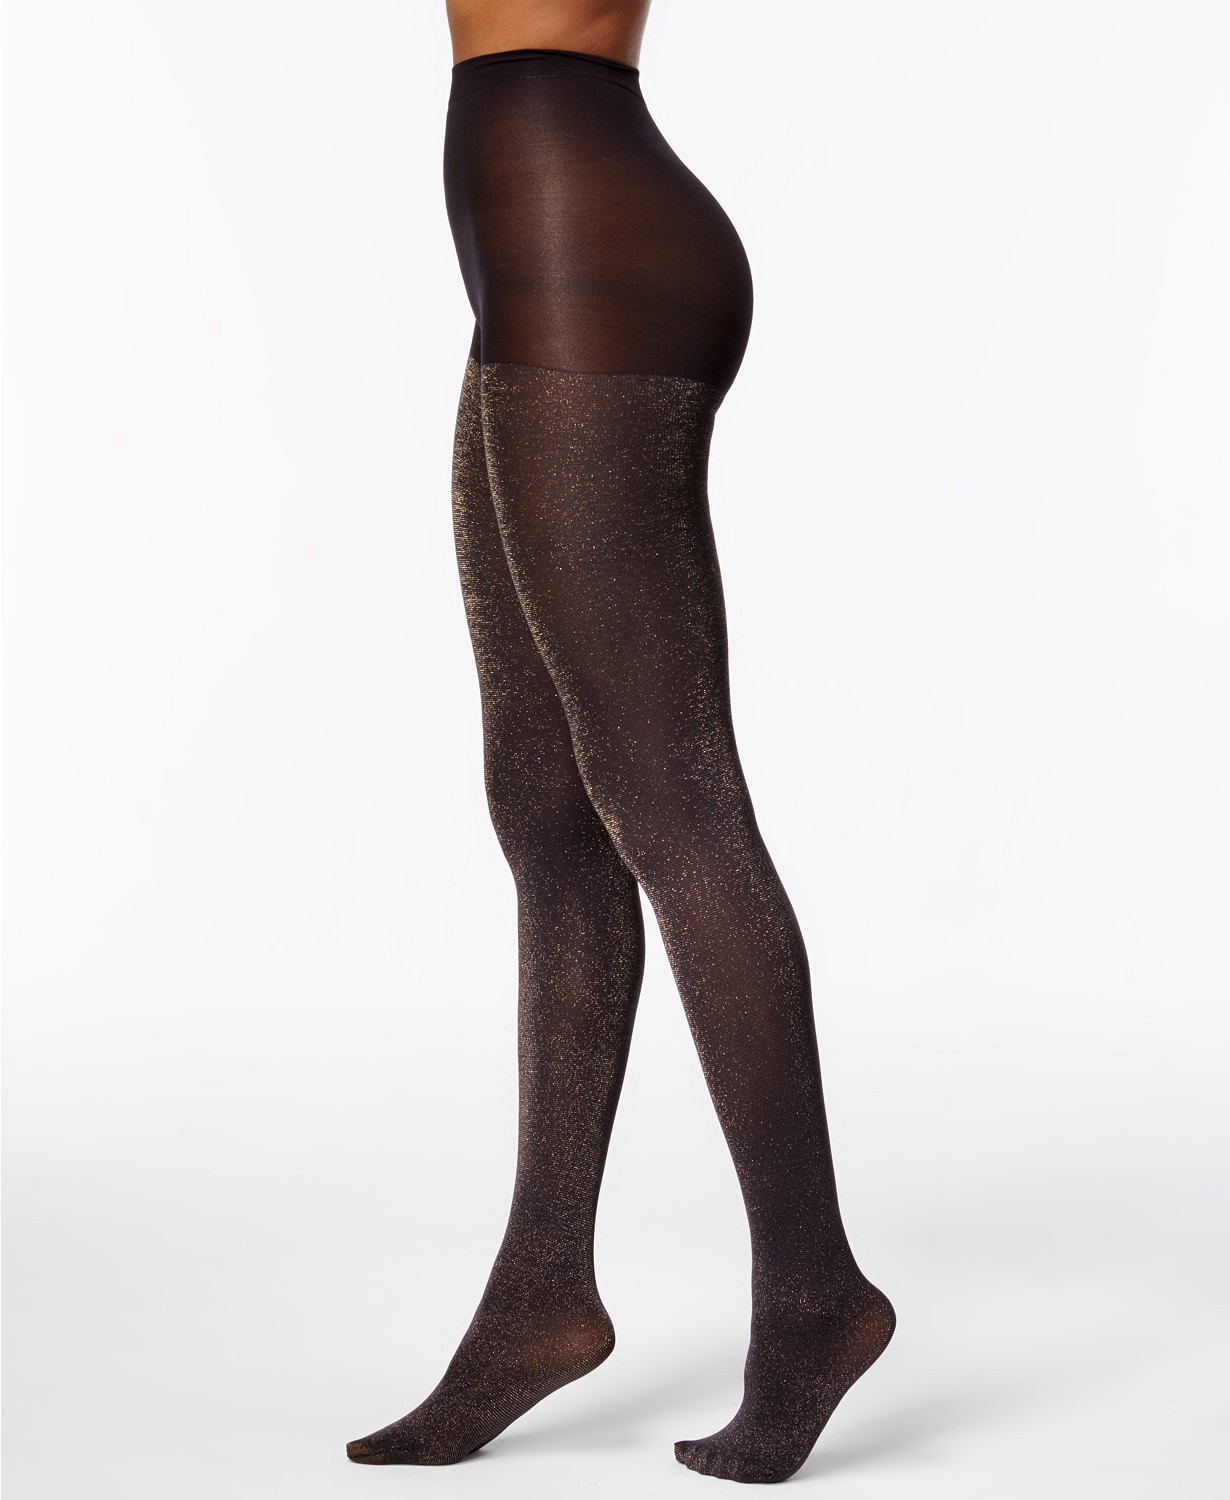 www.couturepoint.com-hue-womens-black-rose-pattern-control-top-tights-copy